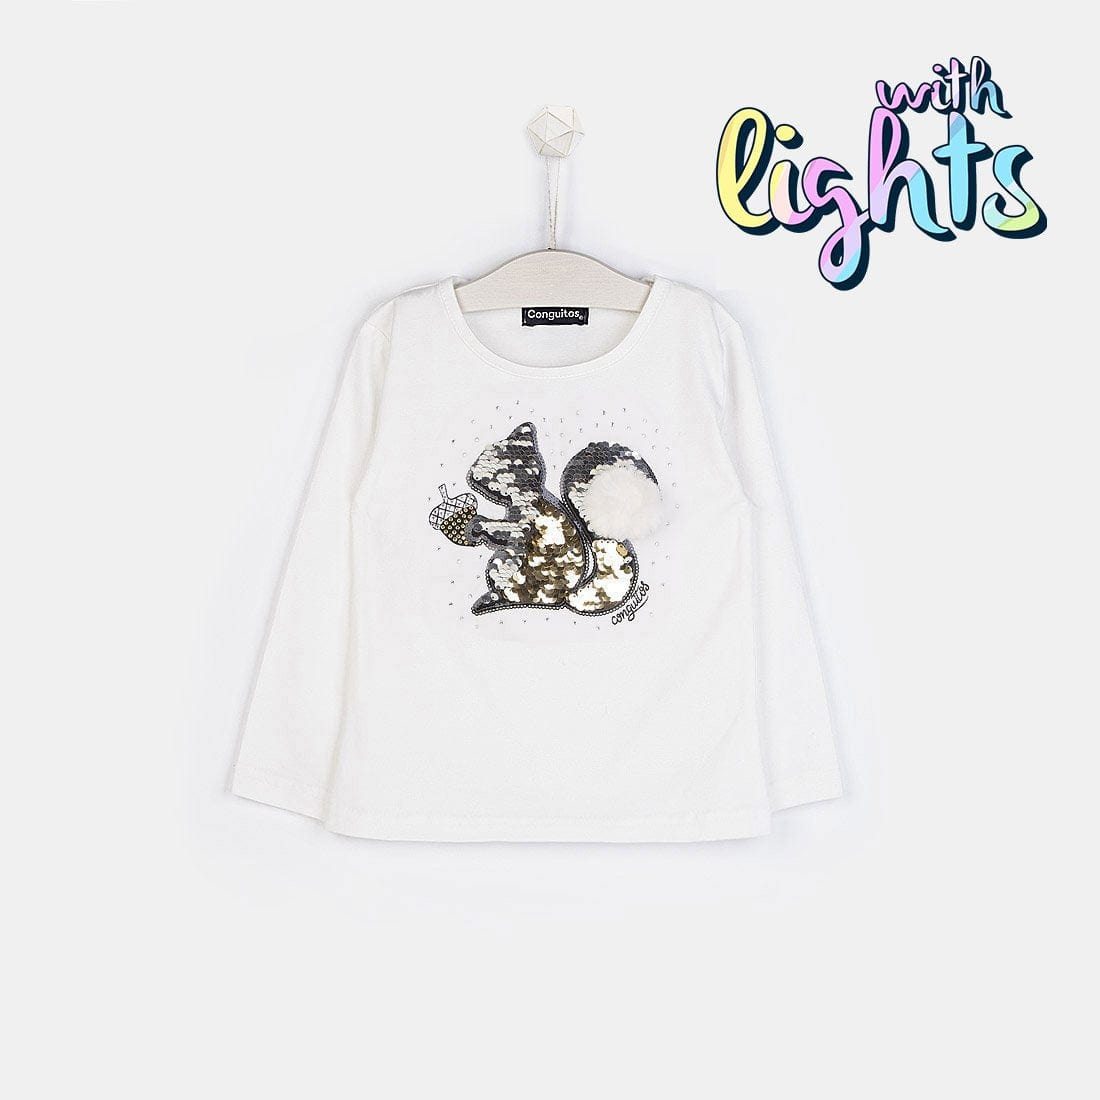 CONGUITOS TEXTIL Clothing Girls "Squirrel" White T-shirt with Lights